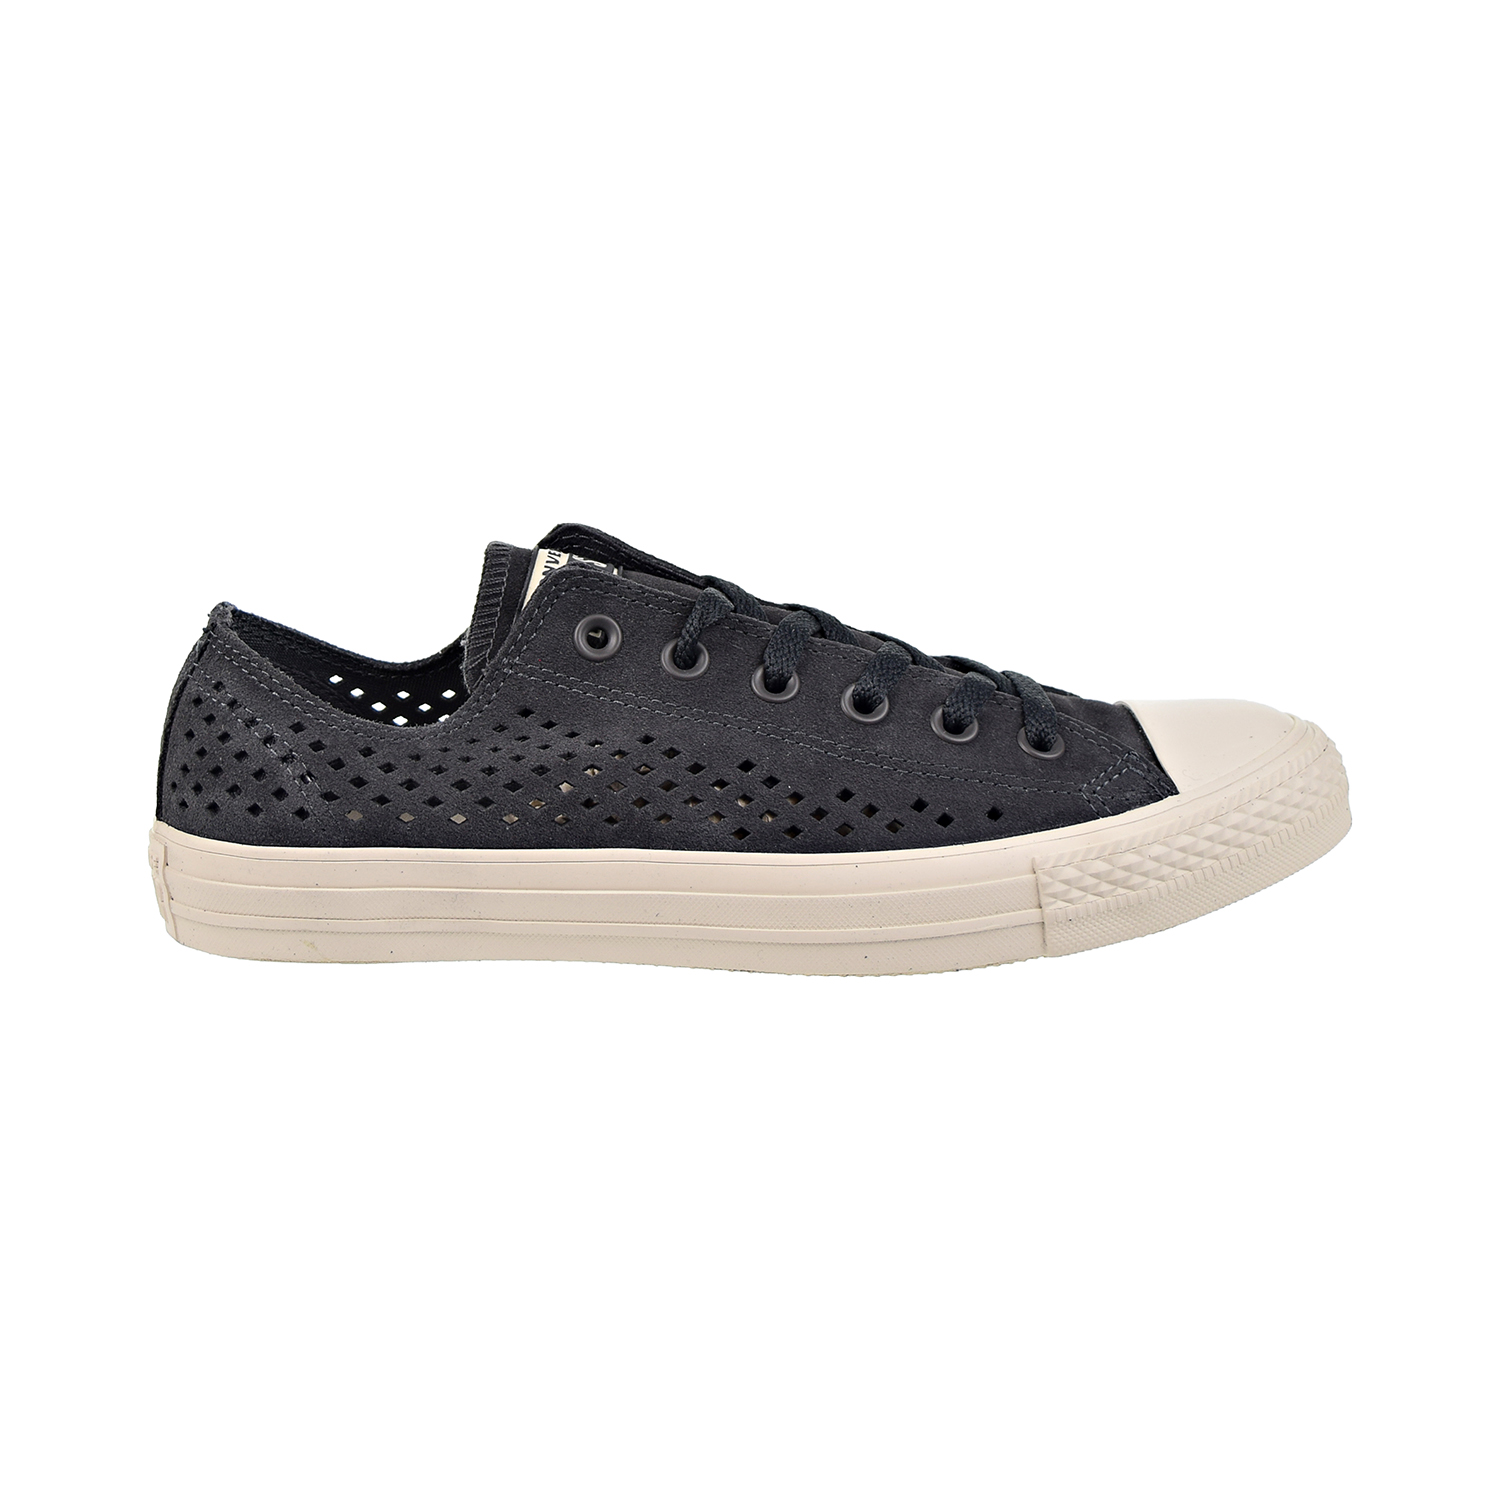 Converse Chuck Taylor All Star Ox Men's Shoes Perforated Almost Black 160464c - image 1 of 6